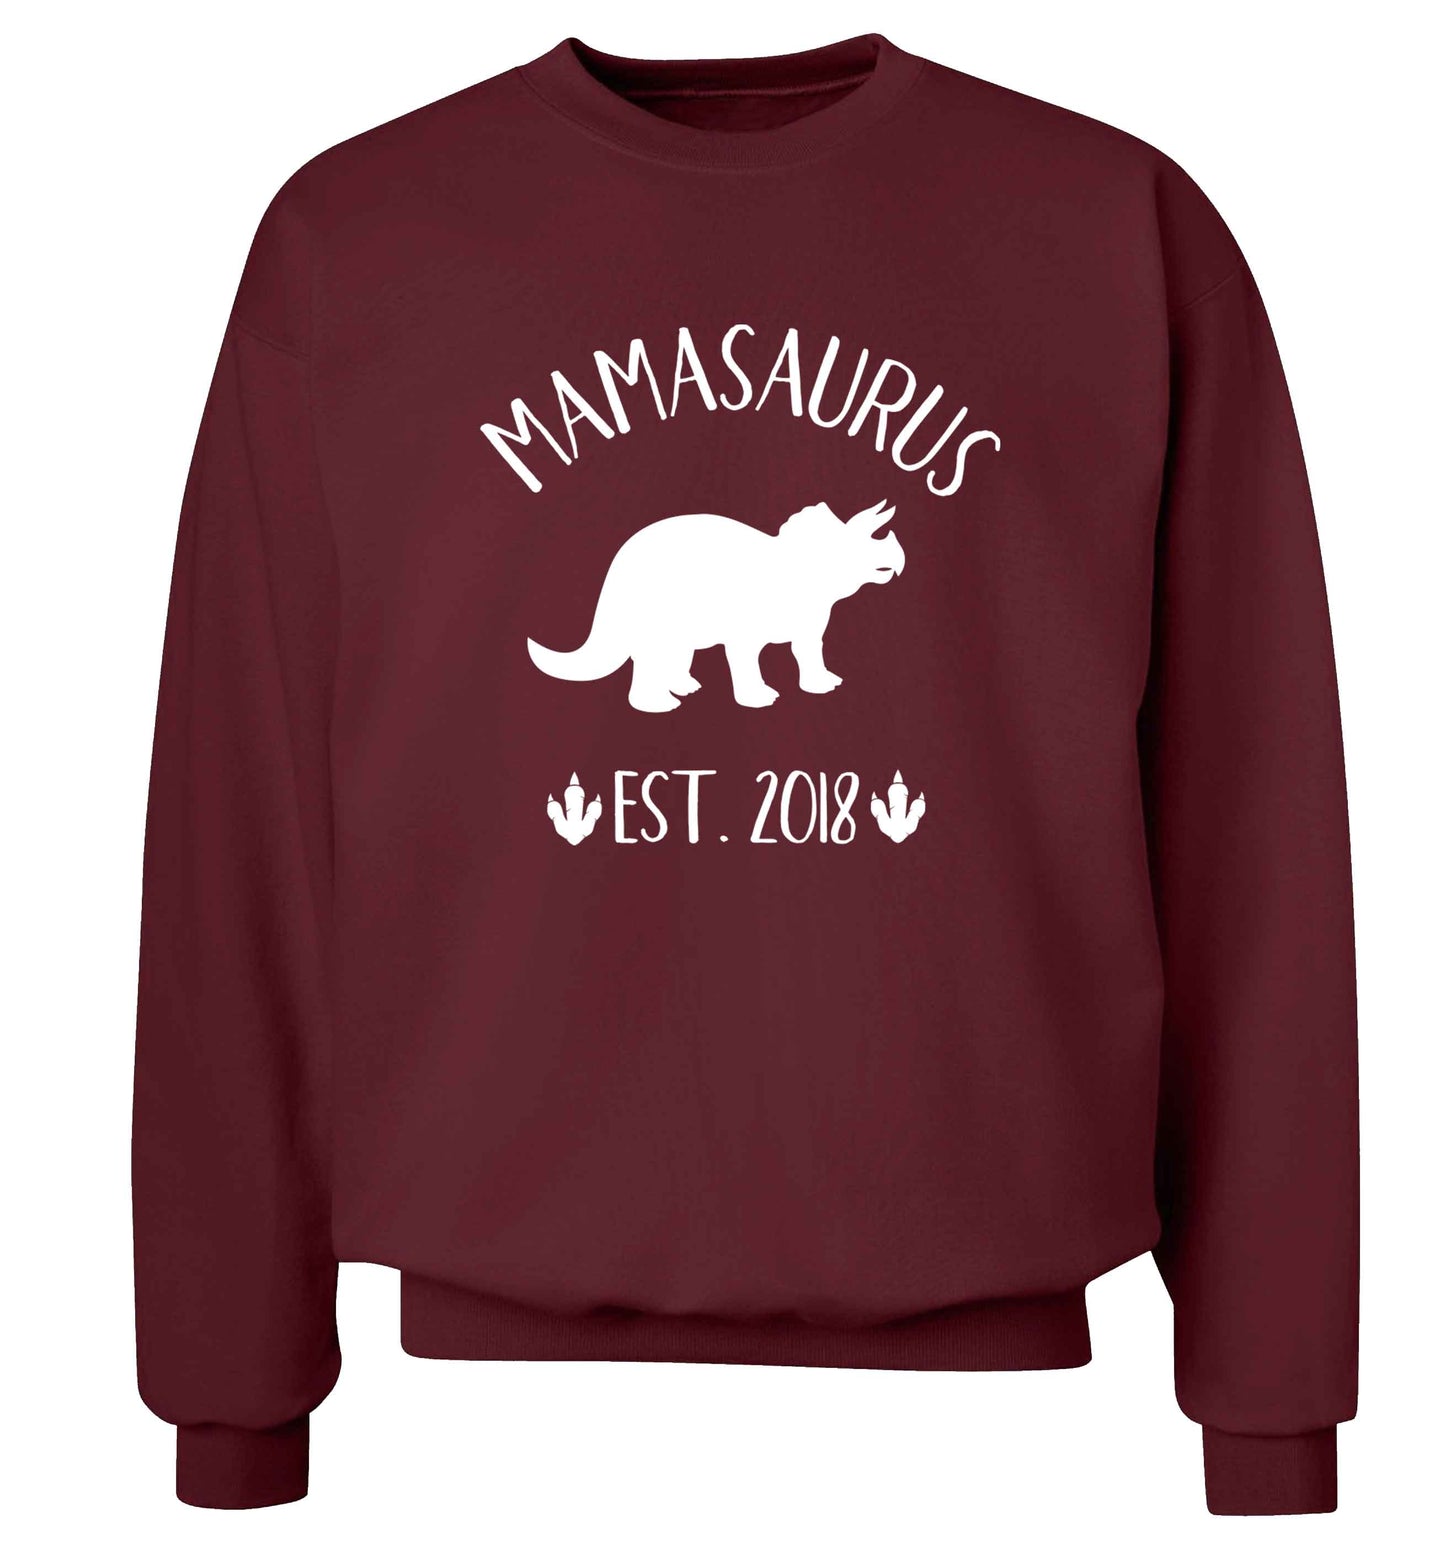 Personalised mamasaurus date adult's unisex maroon sweater 2XL